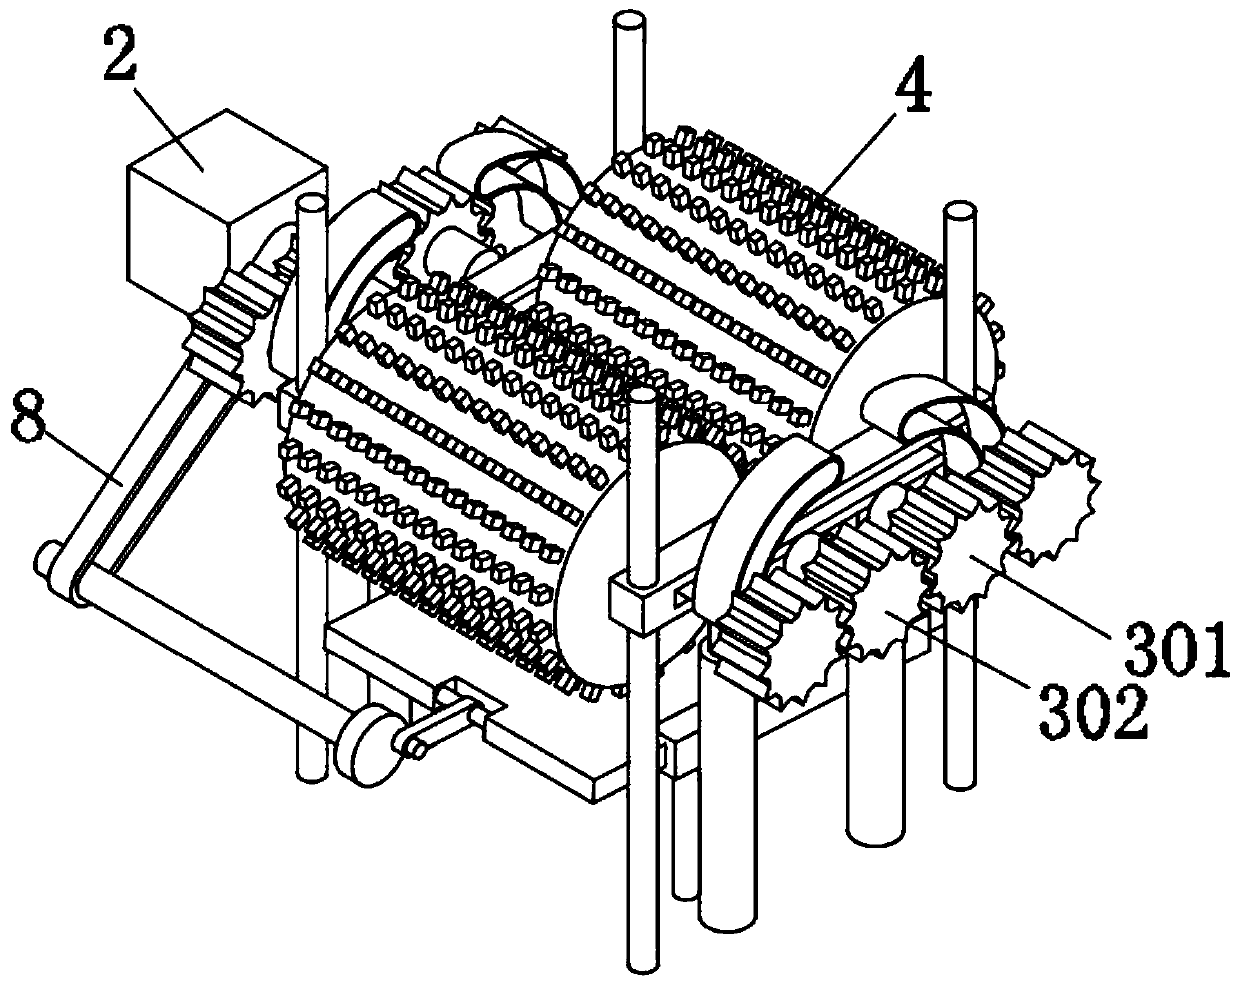 Concrete crushing device for constructional engineering